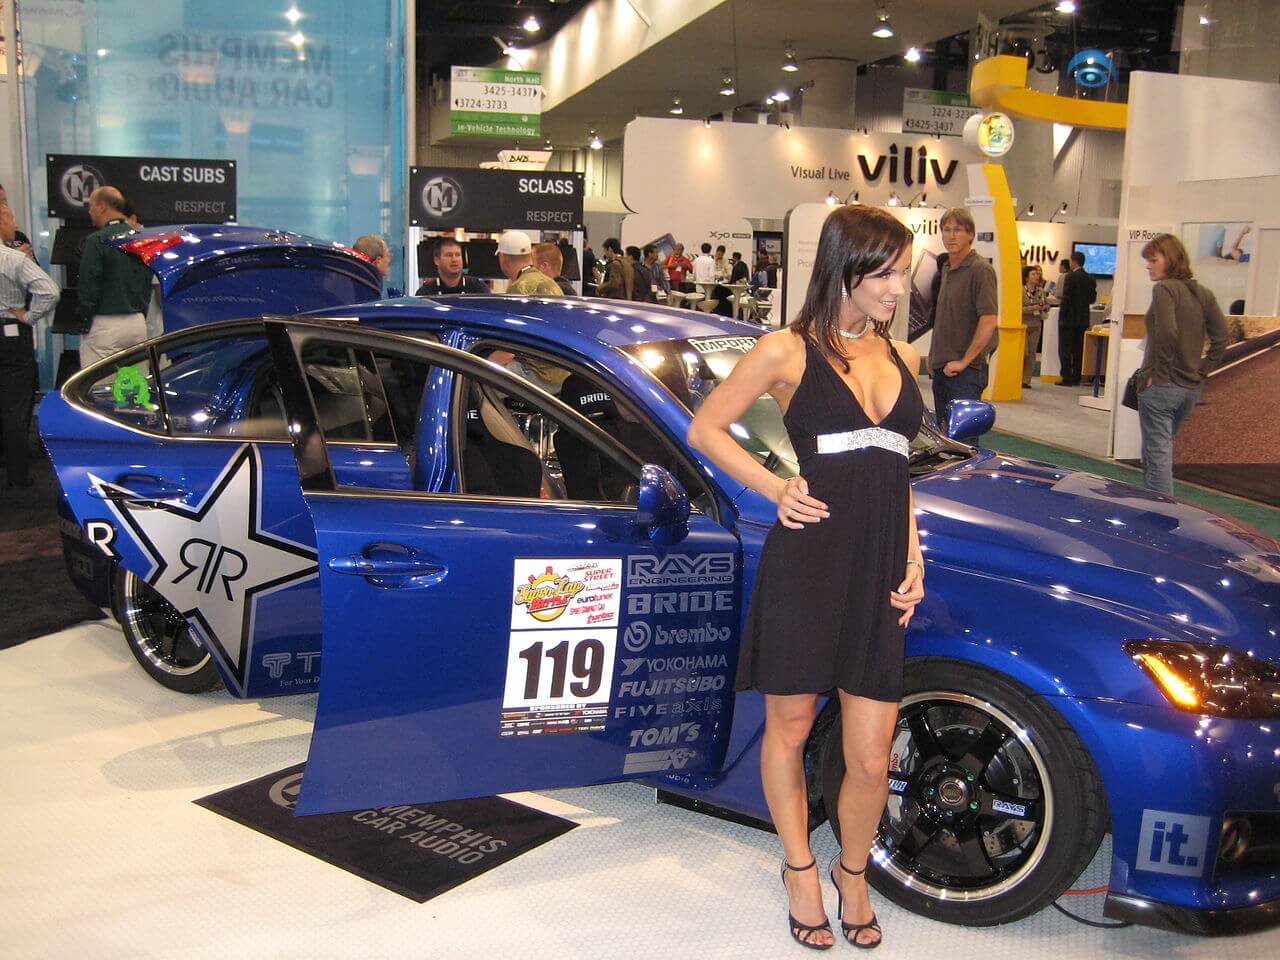 A woman standing next to a blue car on display
